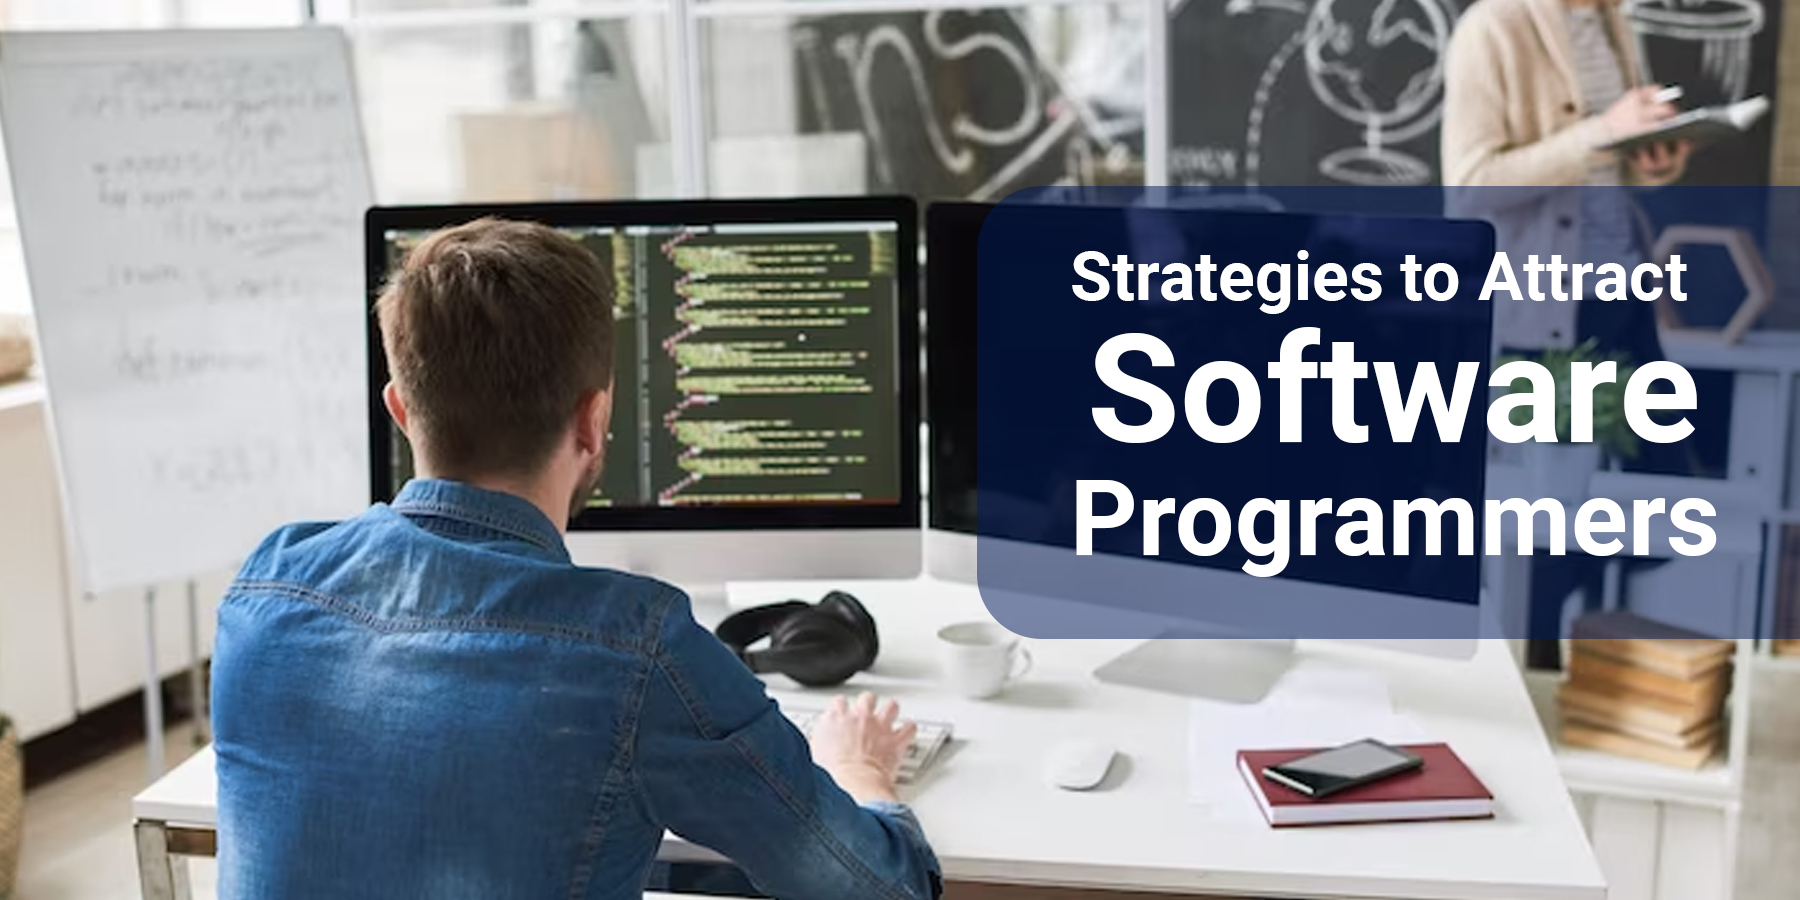 Strategies to Attract Software Programmers